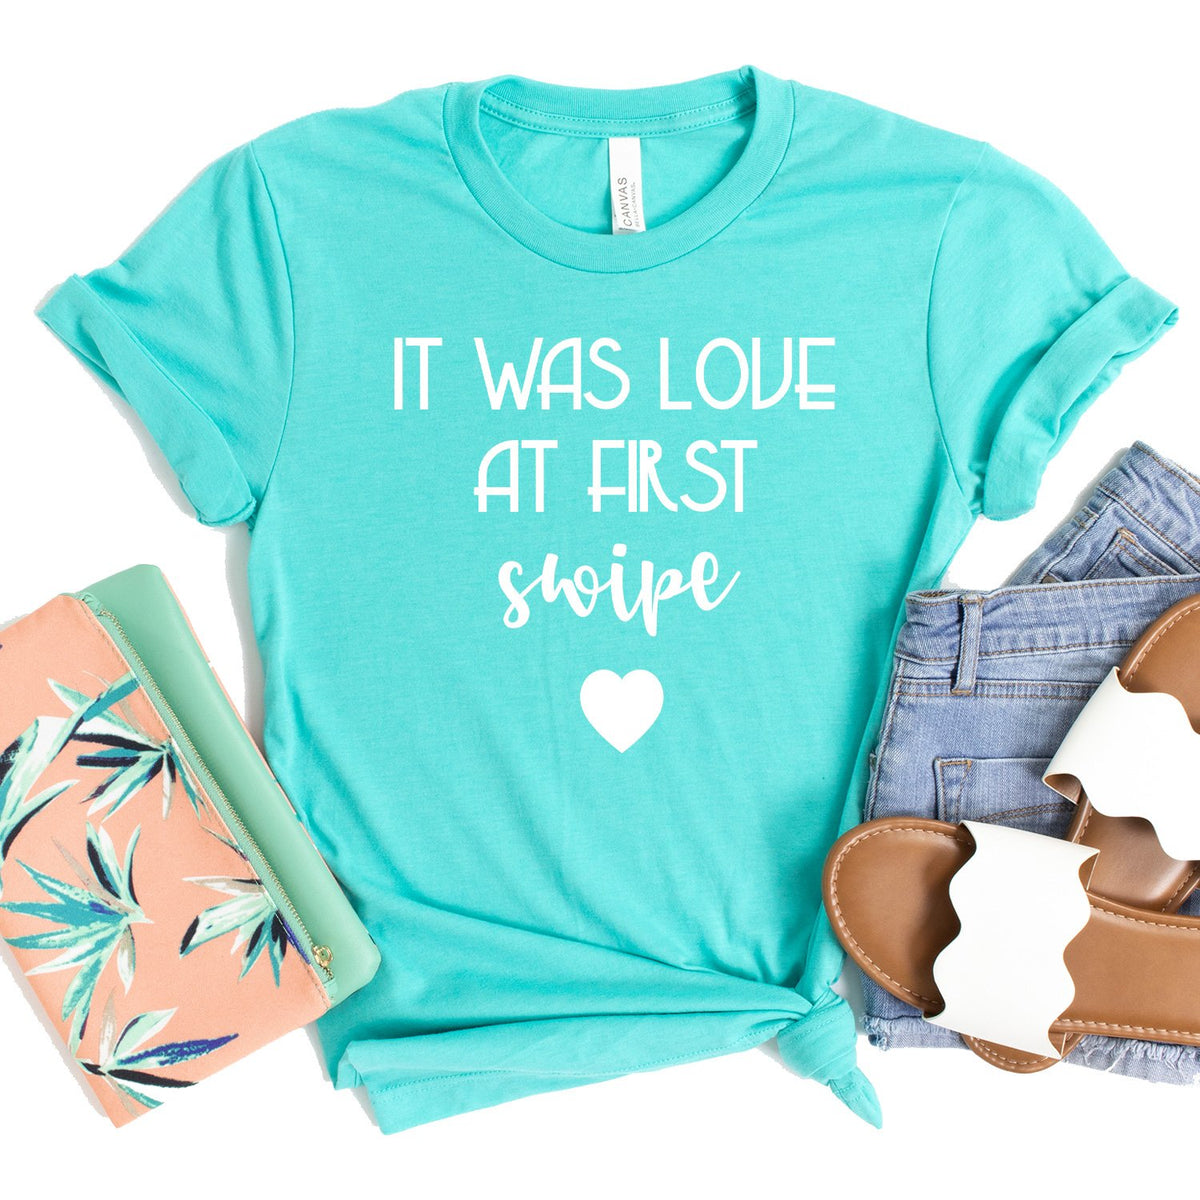 It Was Love at First Swipe - Short Sleeve Tee Shirt